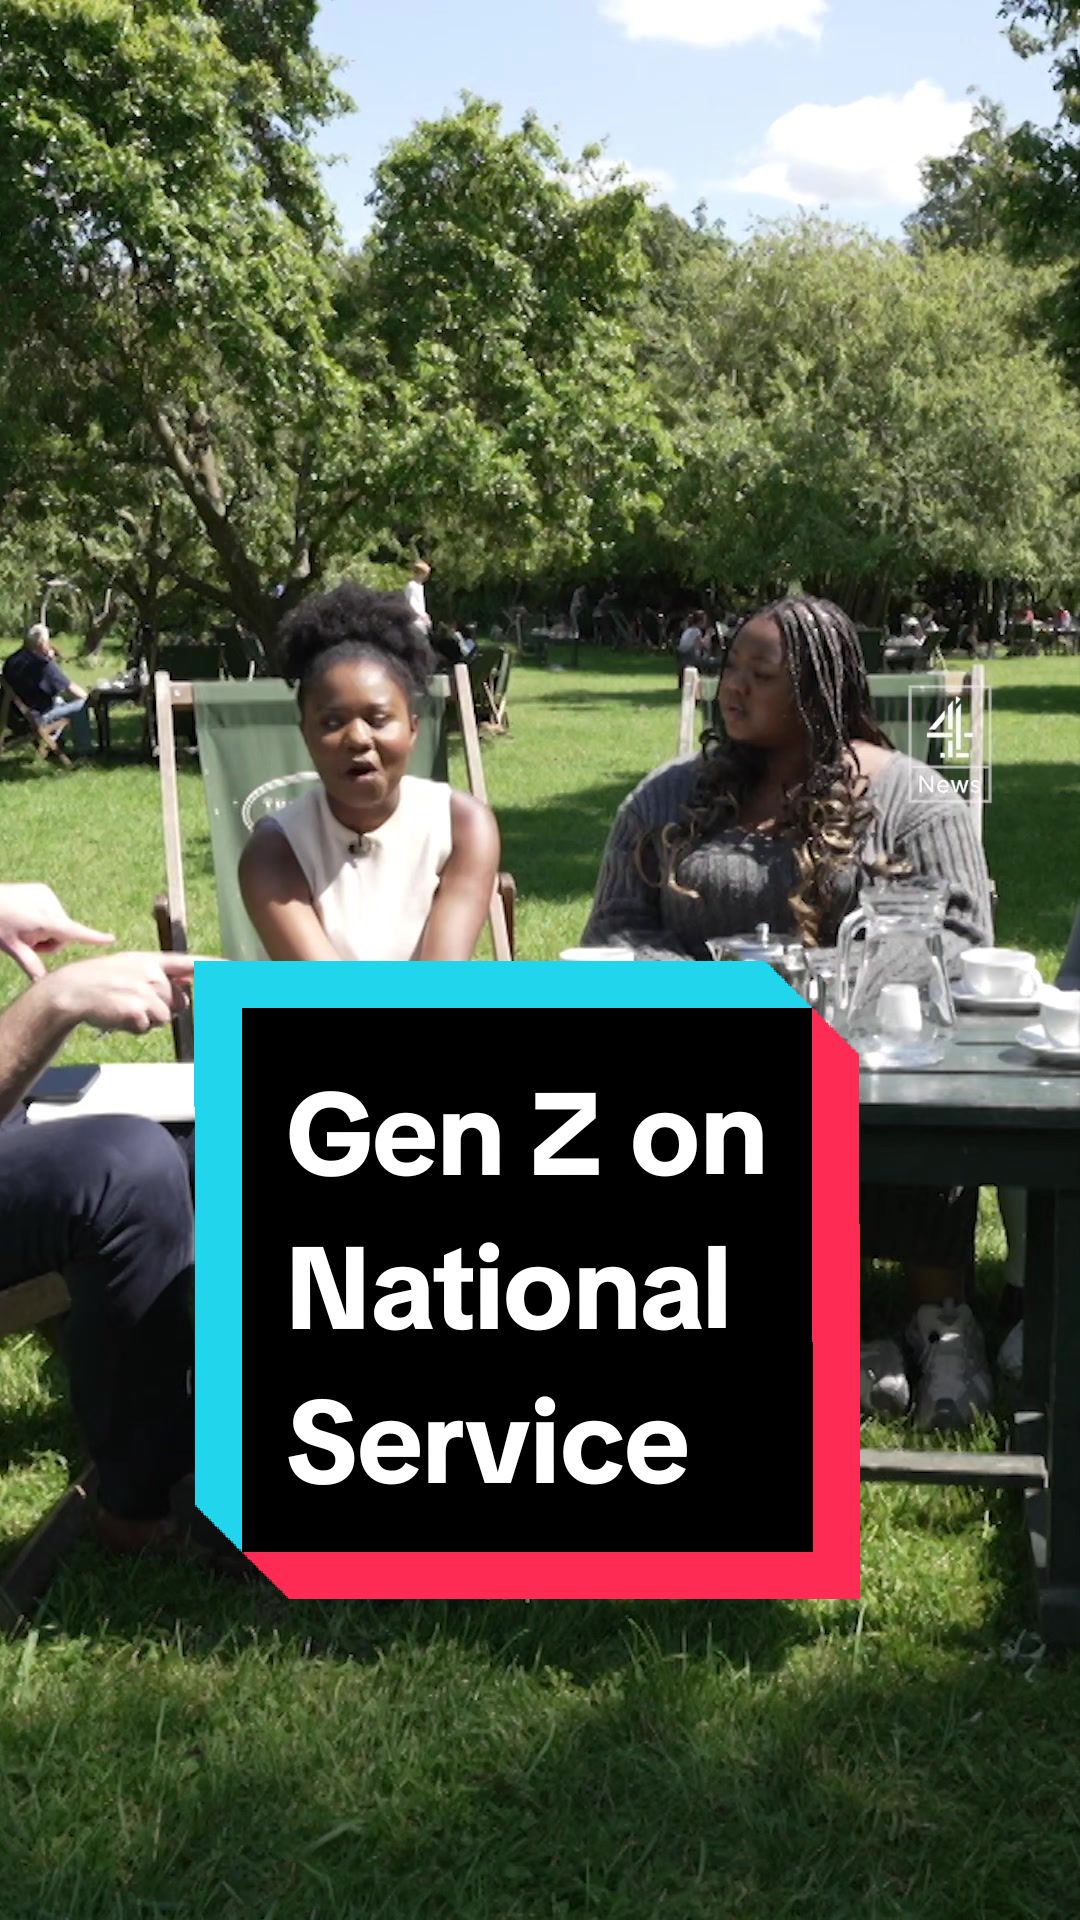 We speak to young people about their views on National Service. One of them tells us she'd 'love to help' her country.  #NationalService #UKPolitics #Politics #Sunak #Conservatives #C4News